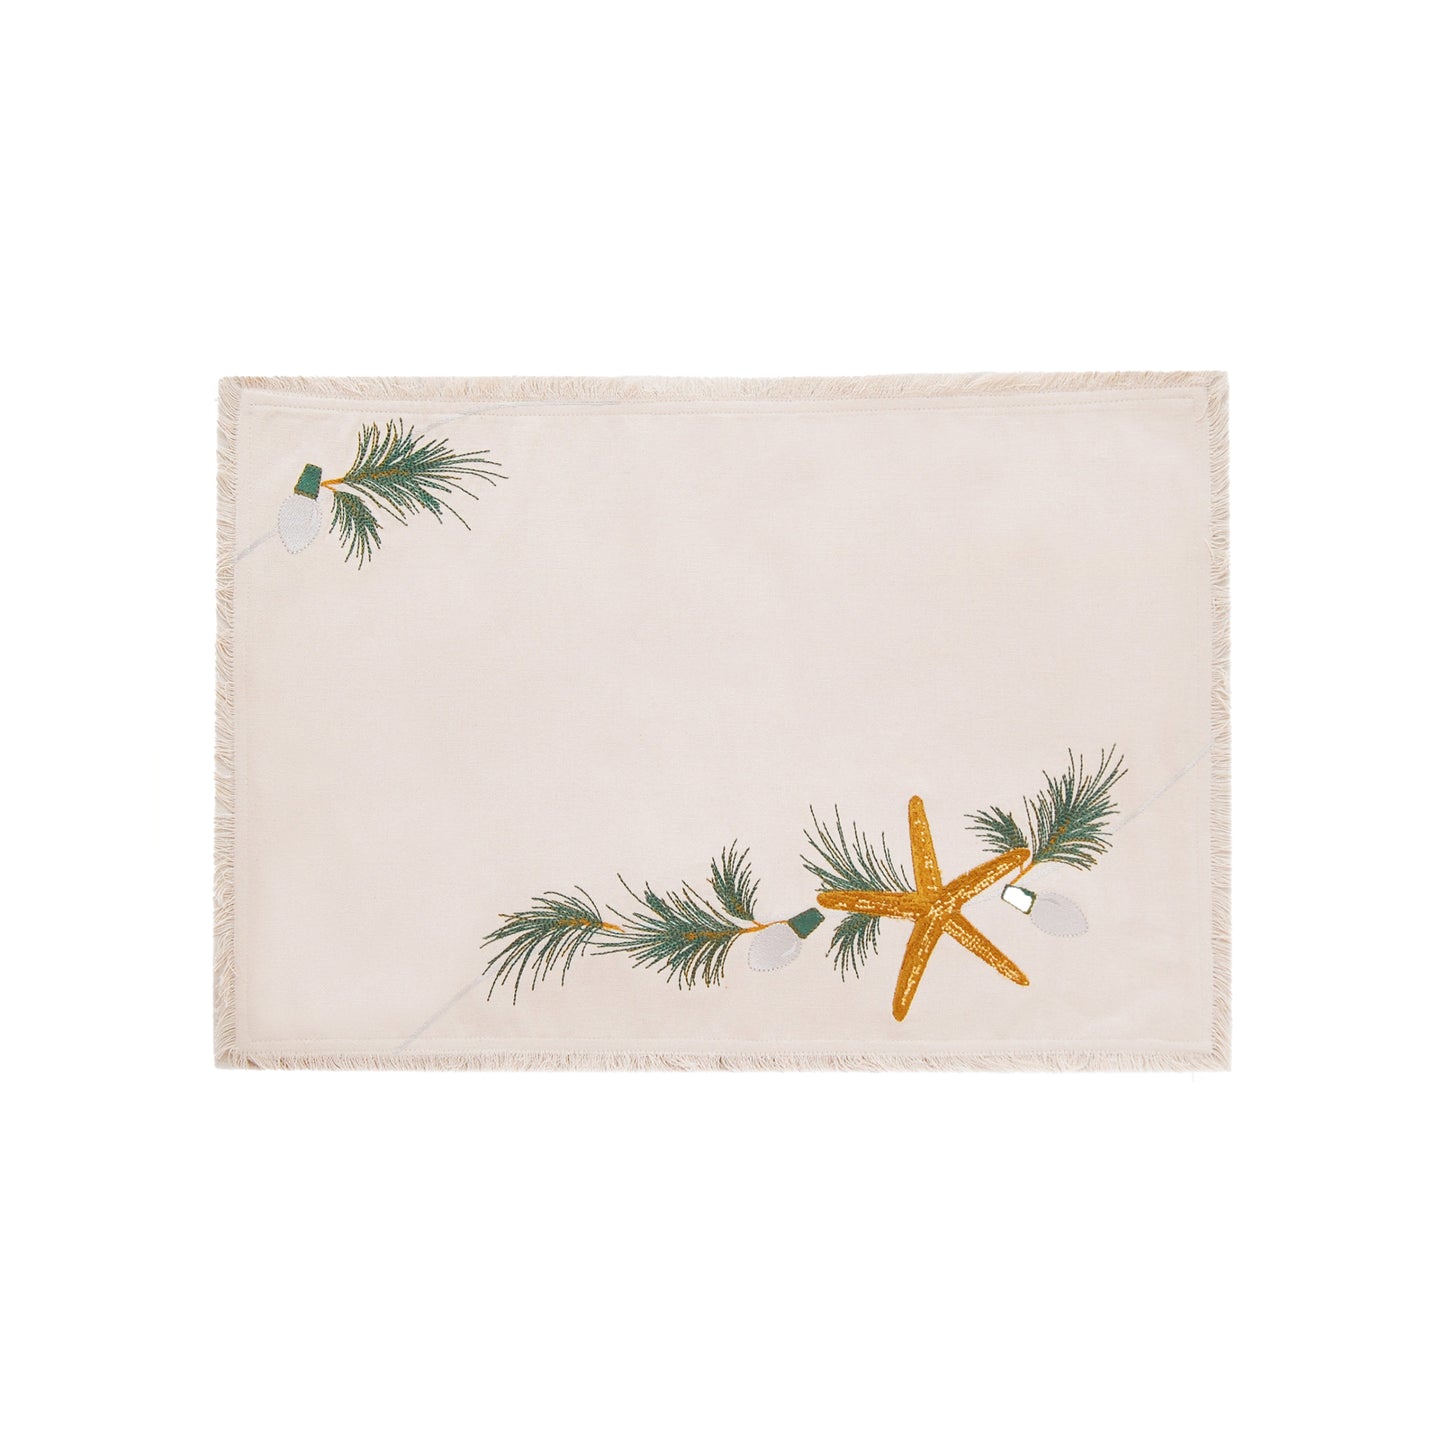 Natural cotton fringed placemat featuring an embroidered sea star, holiday lights, and evergreen needles.